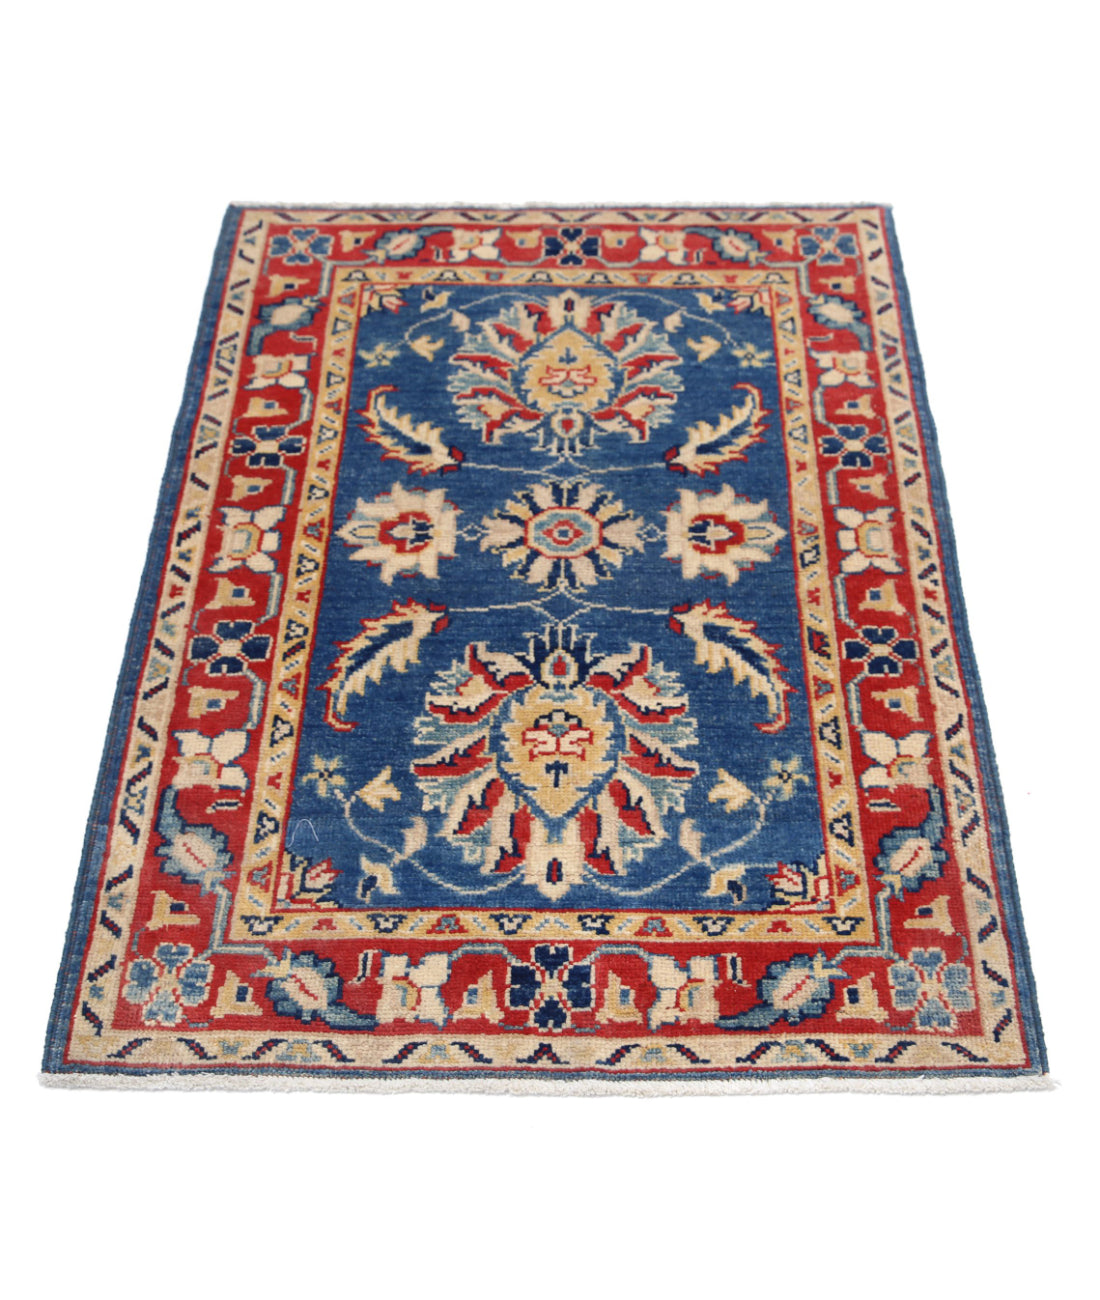 Ziegler 2'8'' X 3'10'' Hand-Knotted Wool Rug 2'8'' x 3'10'' (80 X 115) / Blue / N/A